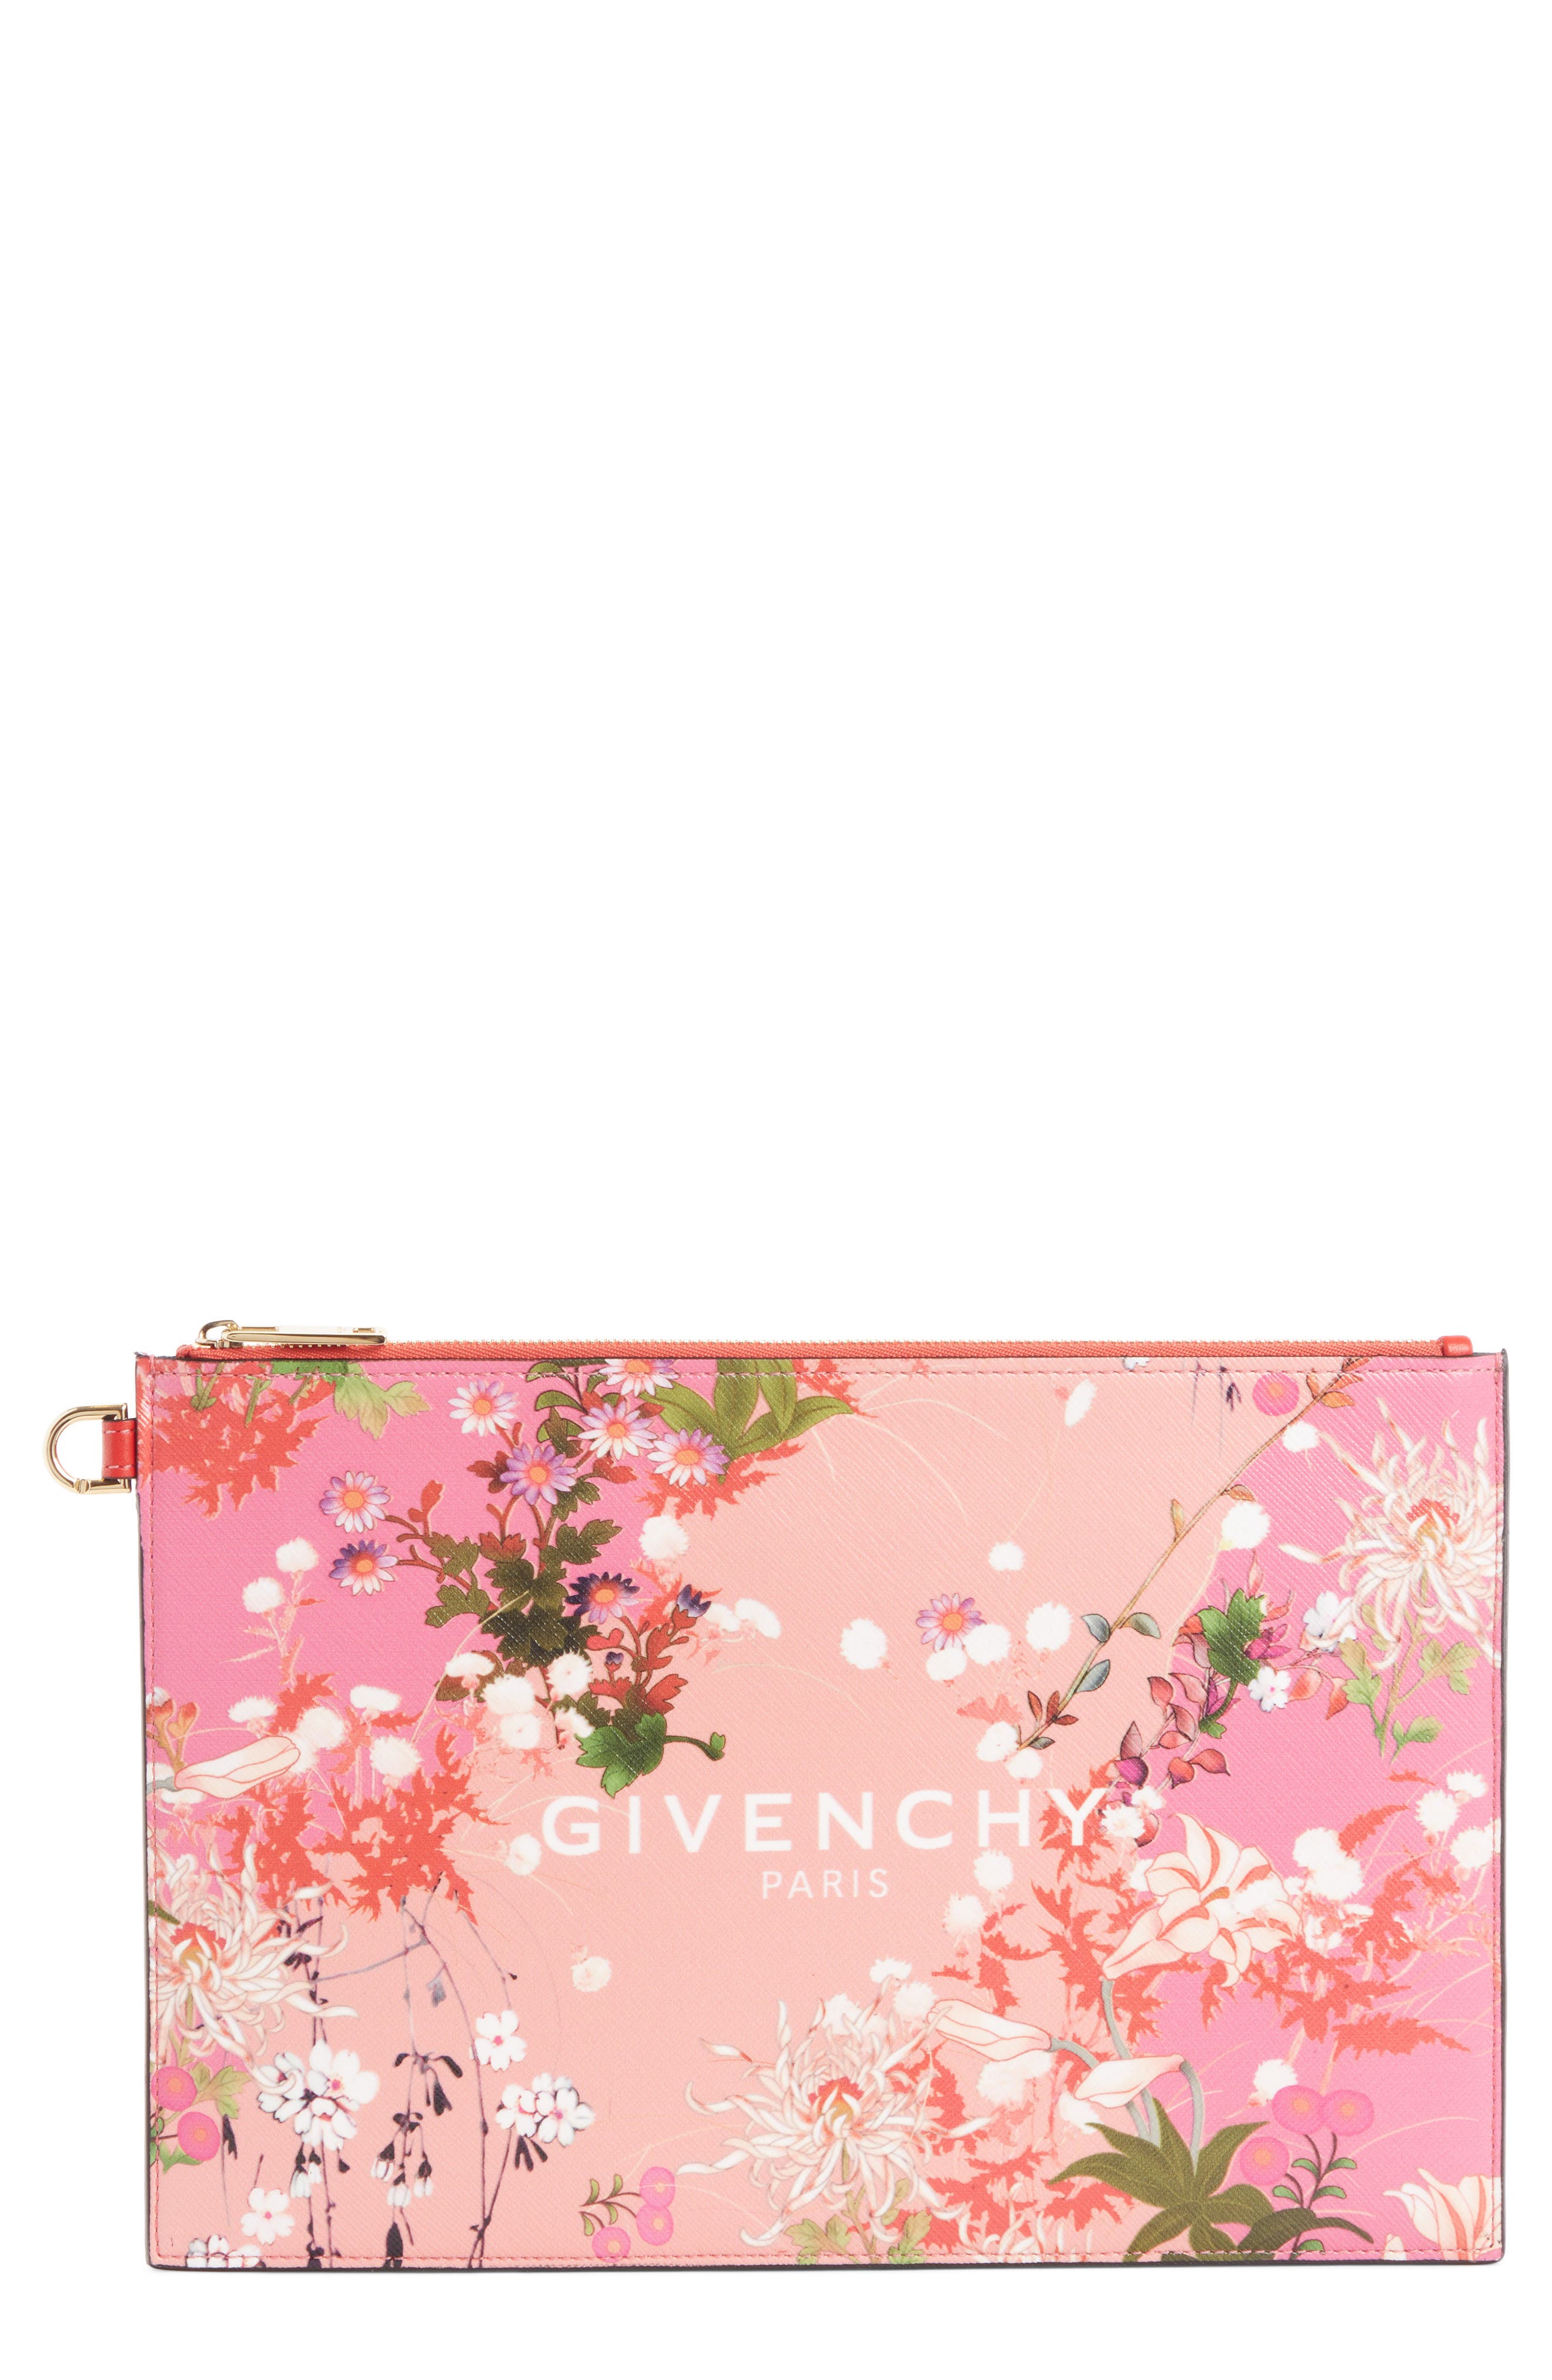 Givenchy Medium Iconic Floral Print 